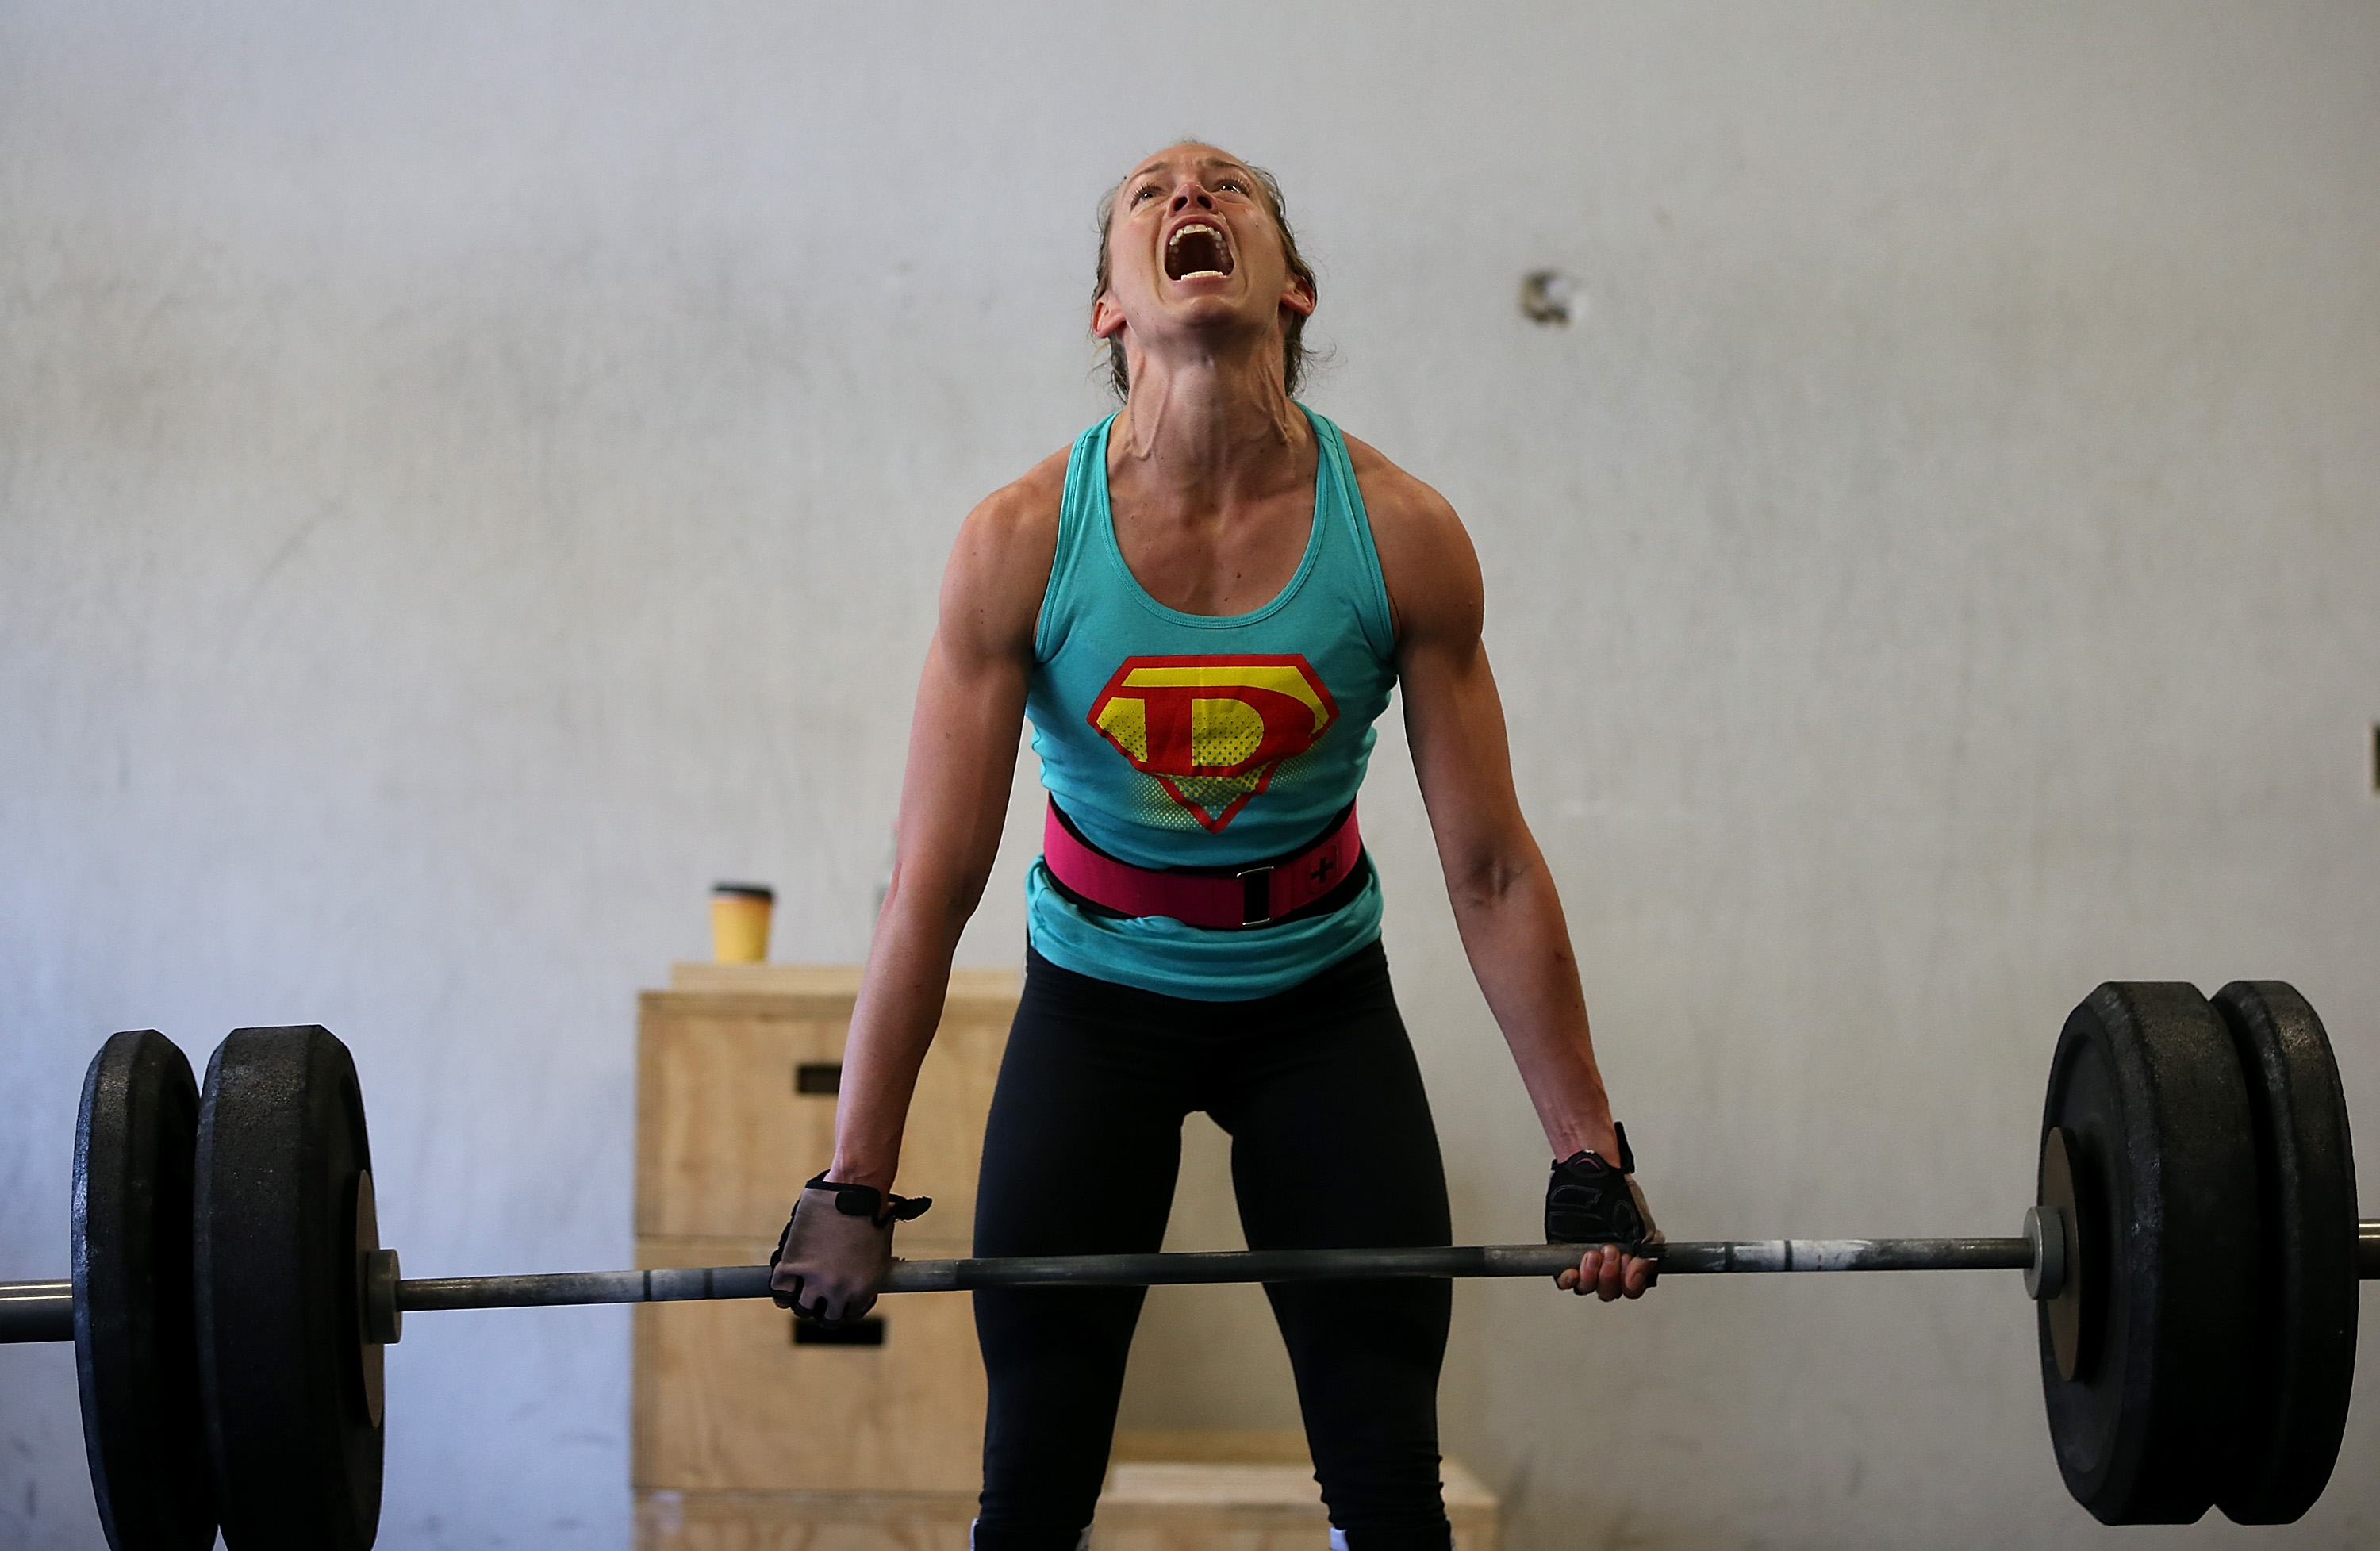 SAN ANSELMO, CA - MARCH 14: Lita Collins does a deadlift during a CrossFit workout at Ross Valley CrossFit on March 14, 2014 in San Anselmo, California. CrossFit, a high intensity workout regimen that is a constantly varied mix of aerobic exercise, gymnastics and Olympic weight lifting, is one of the fastest growing fitness programs in the world. The grueling cult-like core strength and conditioning program is popular with firefighters, police officers, members of the military and professional athletes. Since its inception in 2000, the number of CrossFit affiliates, or "boxes" has skyrocketed to over 8,500 worldwide with more opening every year. (Photo by Justin Sullivan/Getty Images)